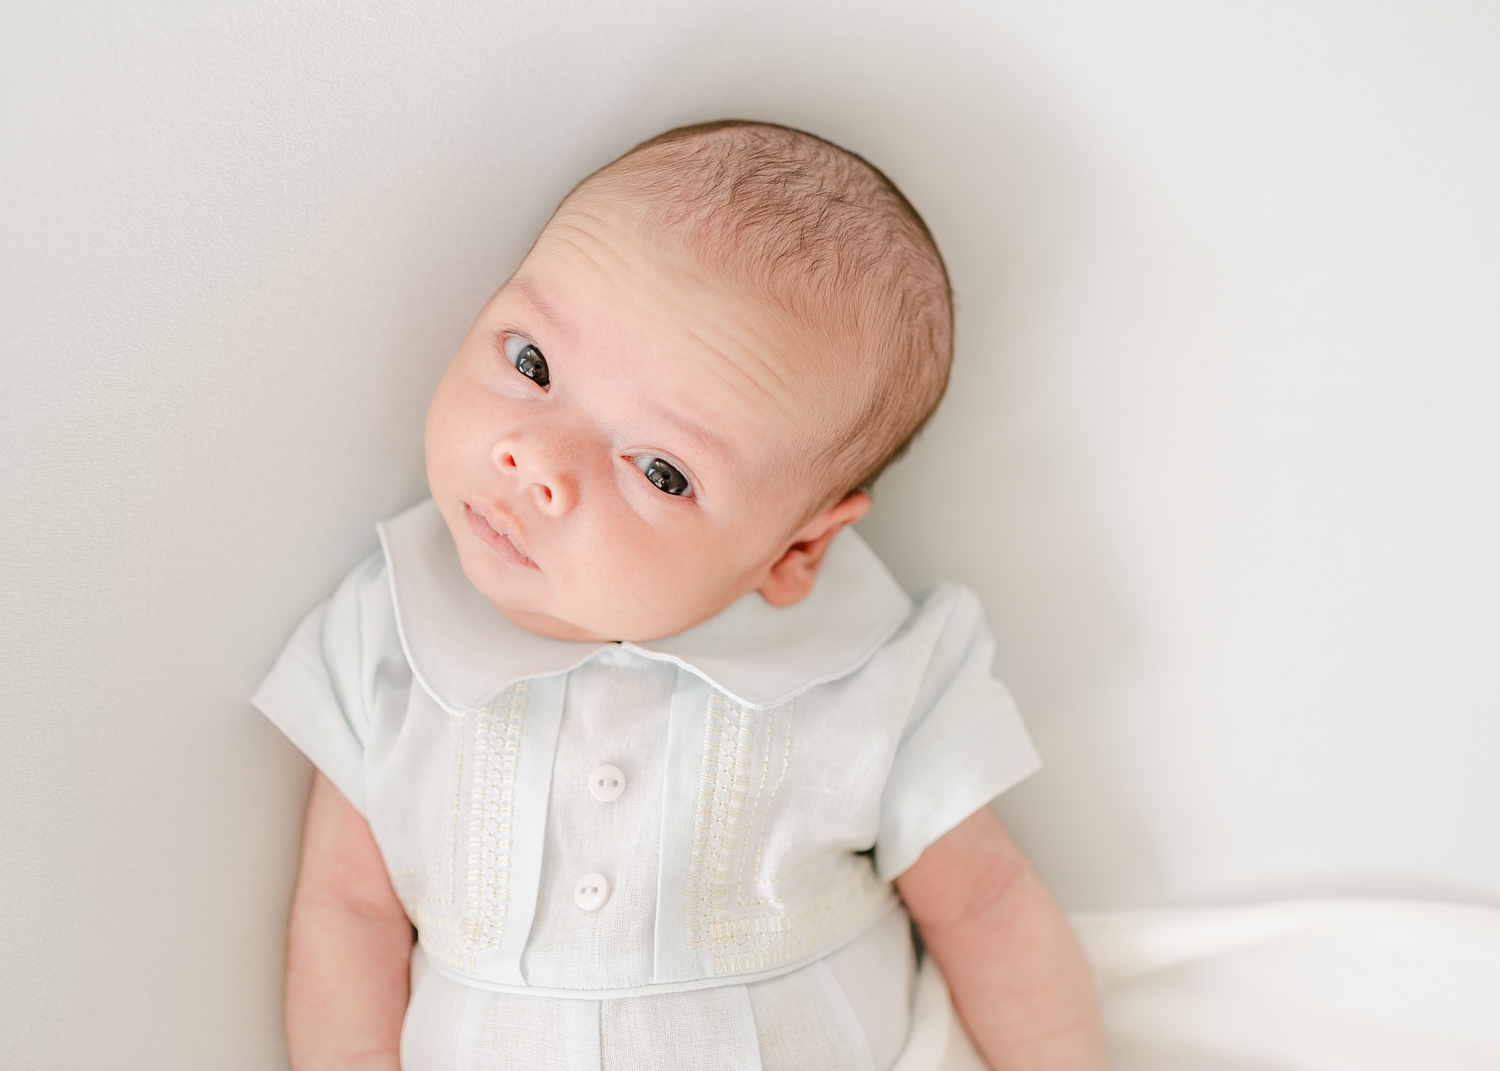 newborn baby boy dressed in pale blue heirloom outfit looking at camera